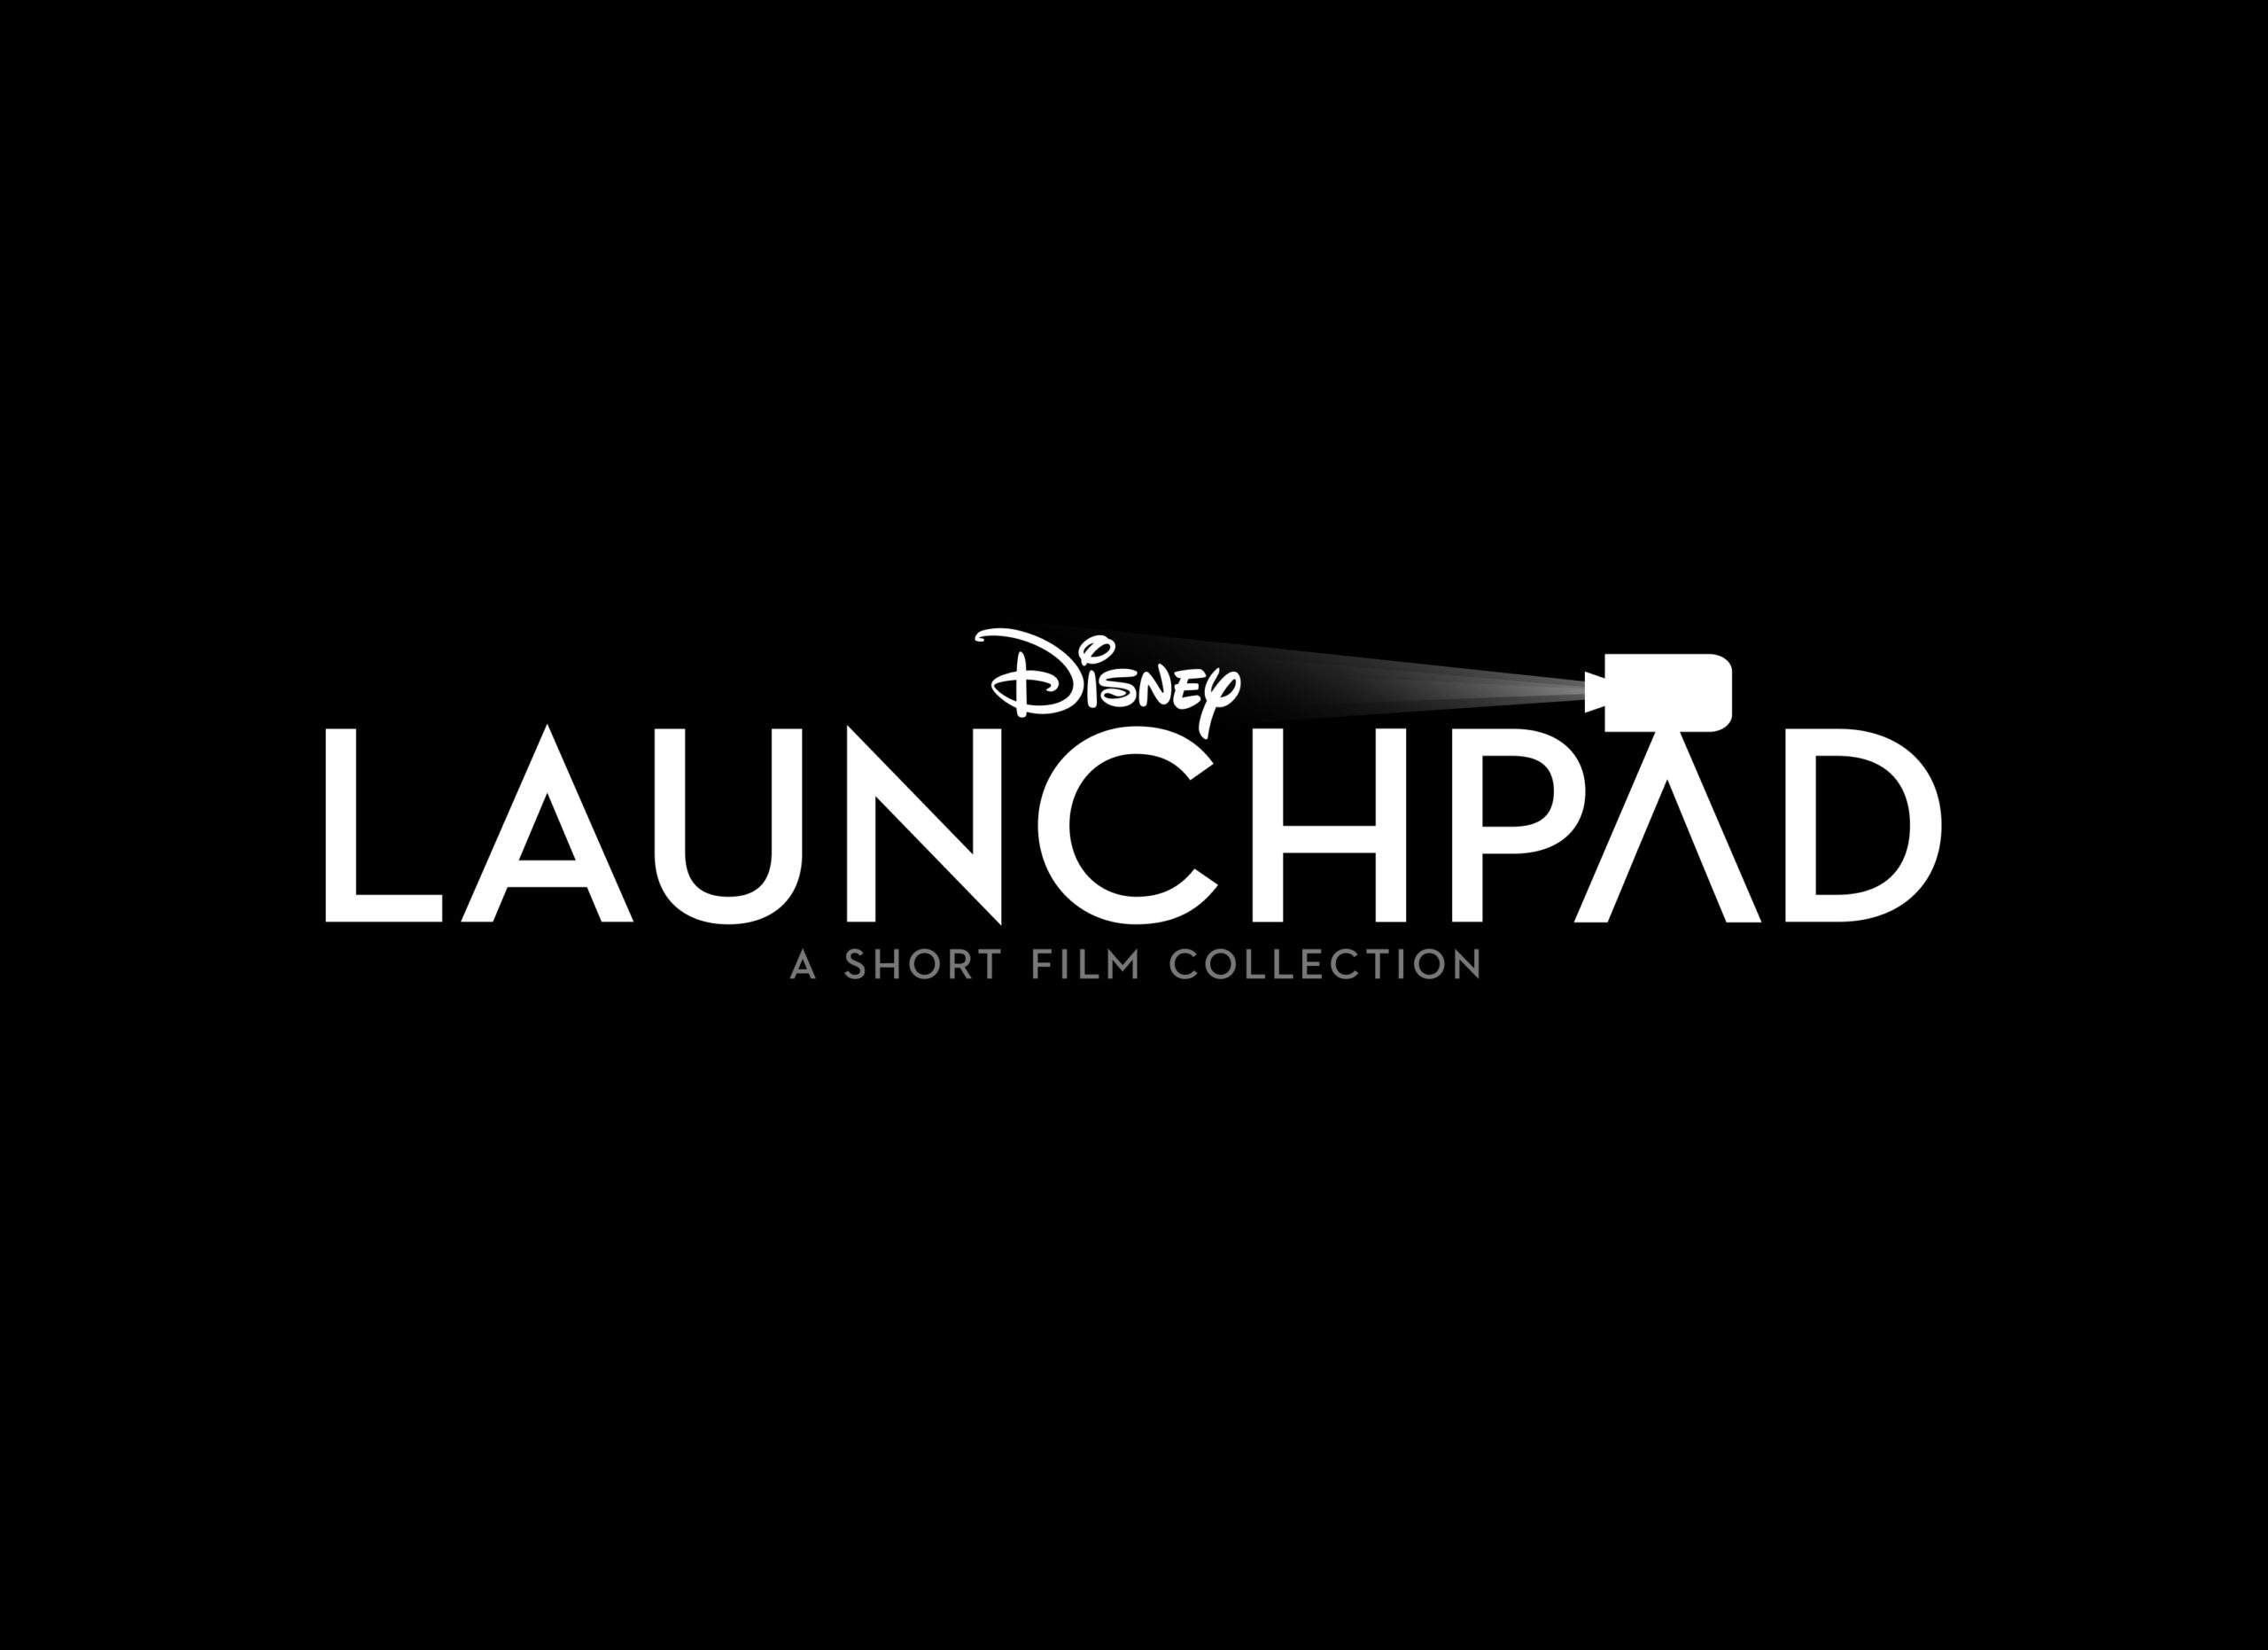 An Introduction To Disney+’s Launchpad